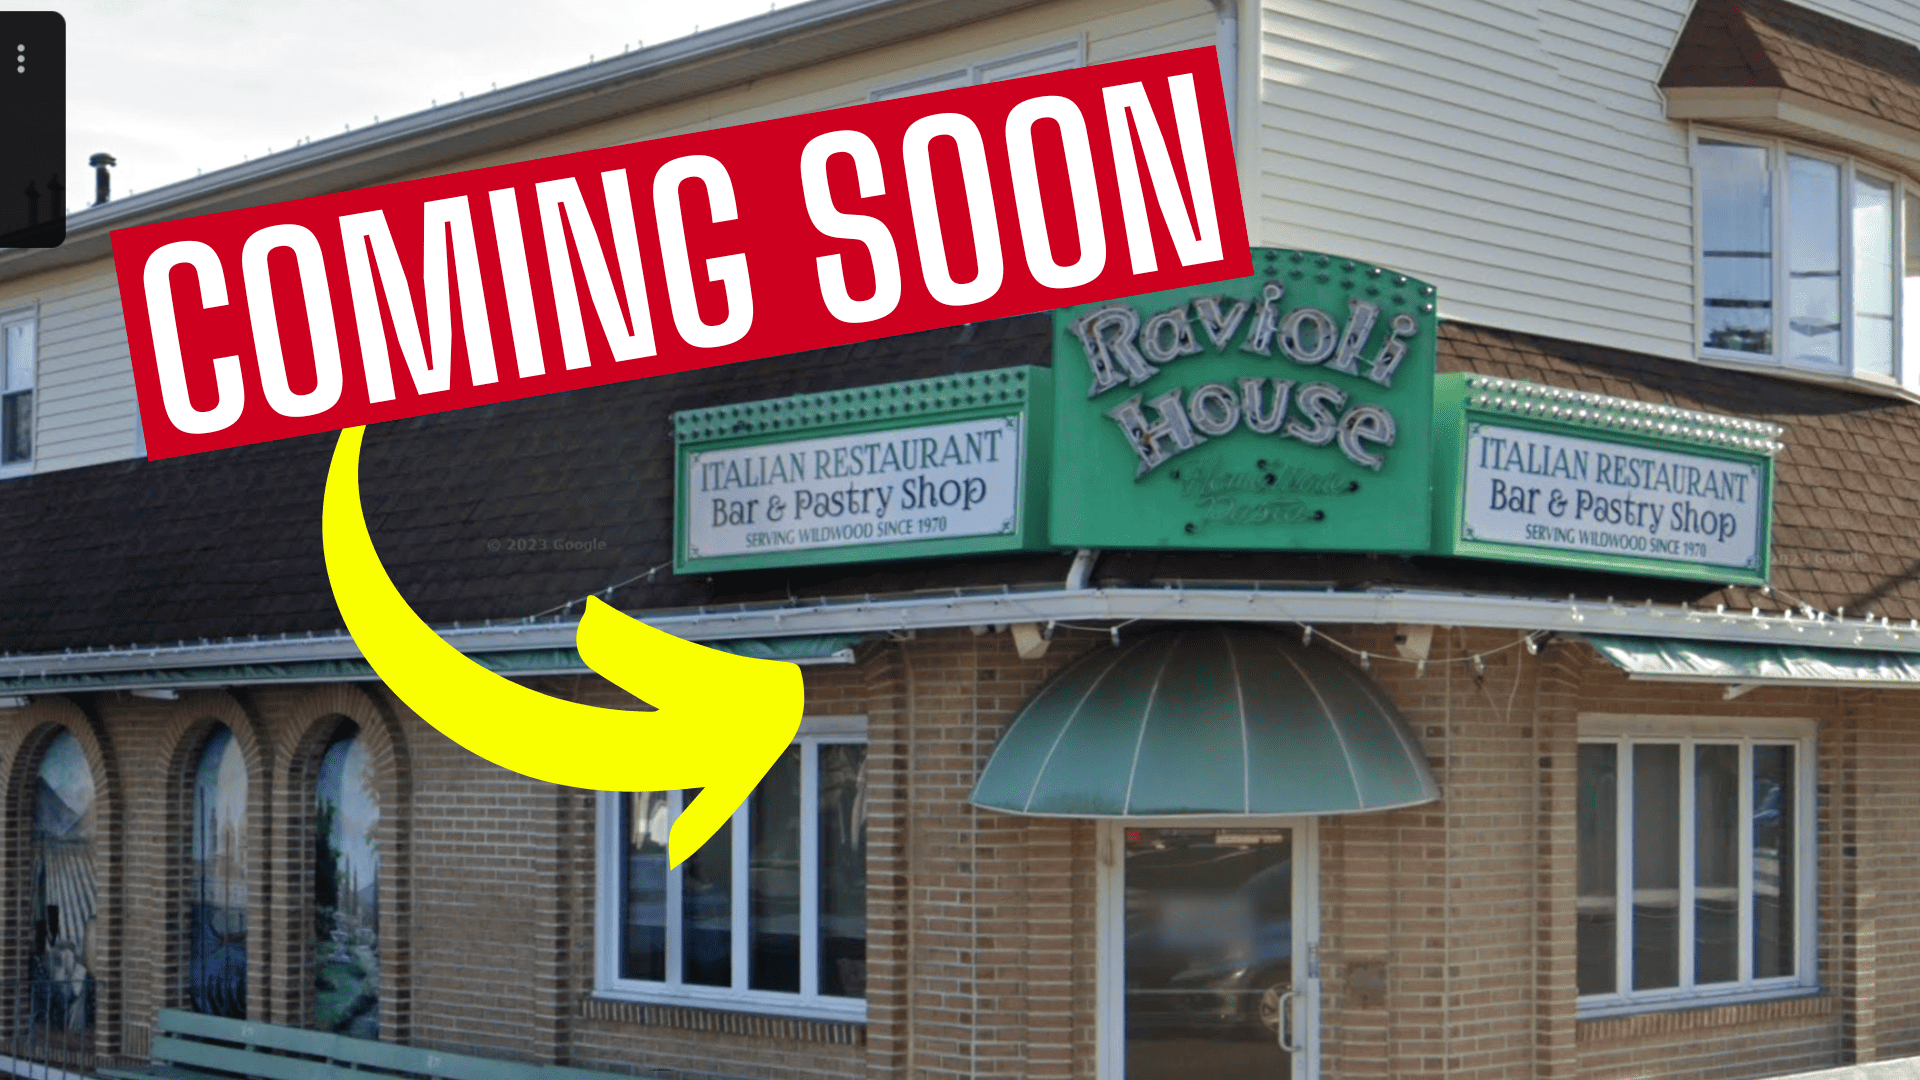 The Ravioli House is Expanding